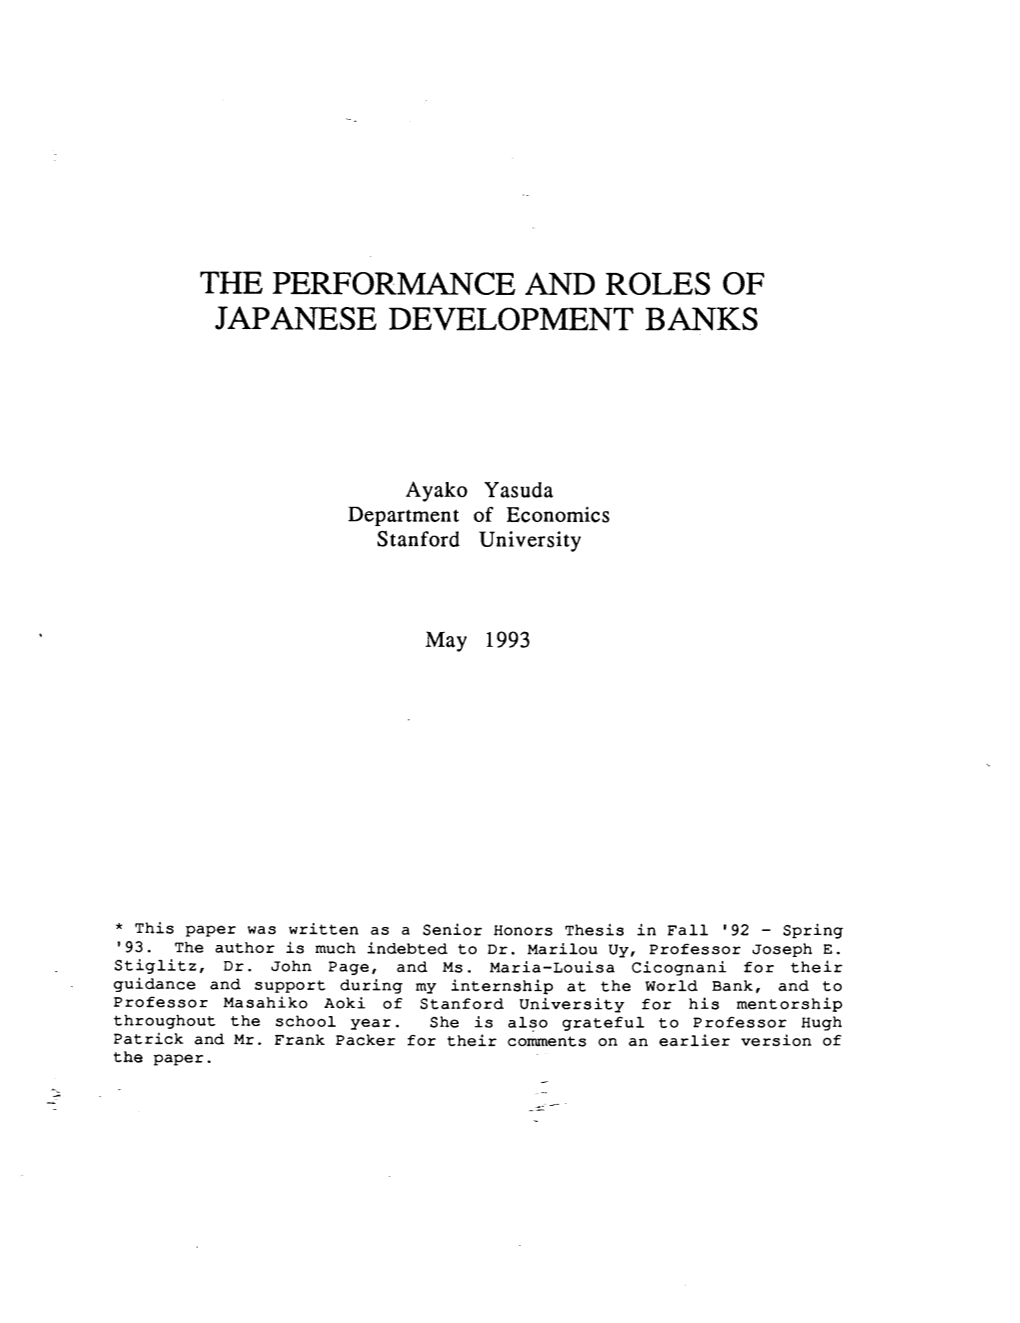 The Performance and Roles of Japanese Development Banks